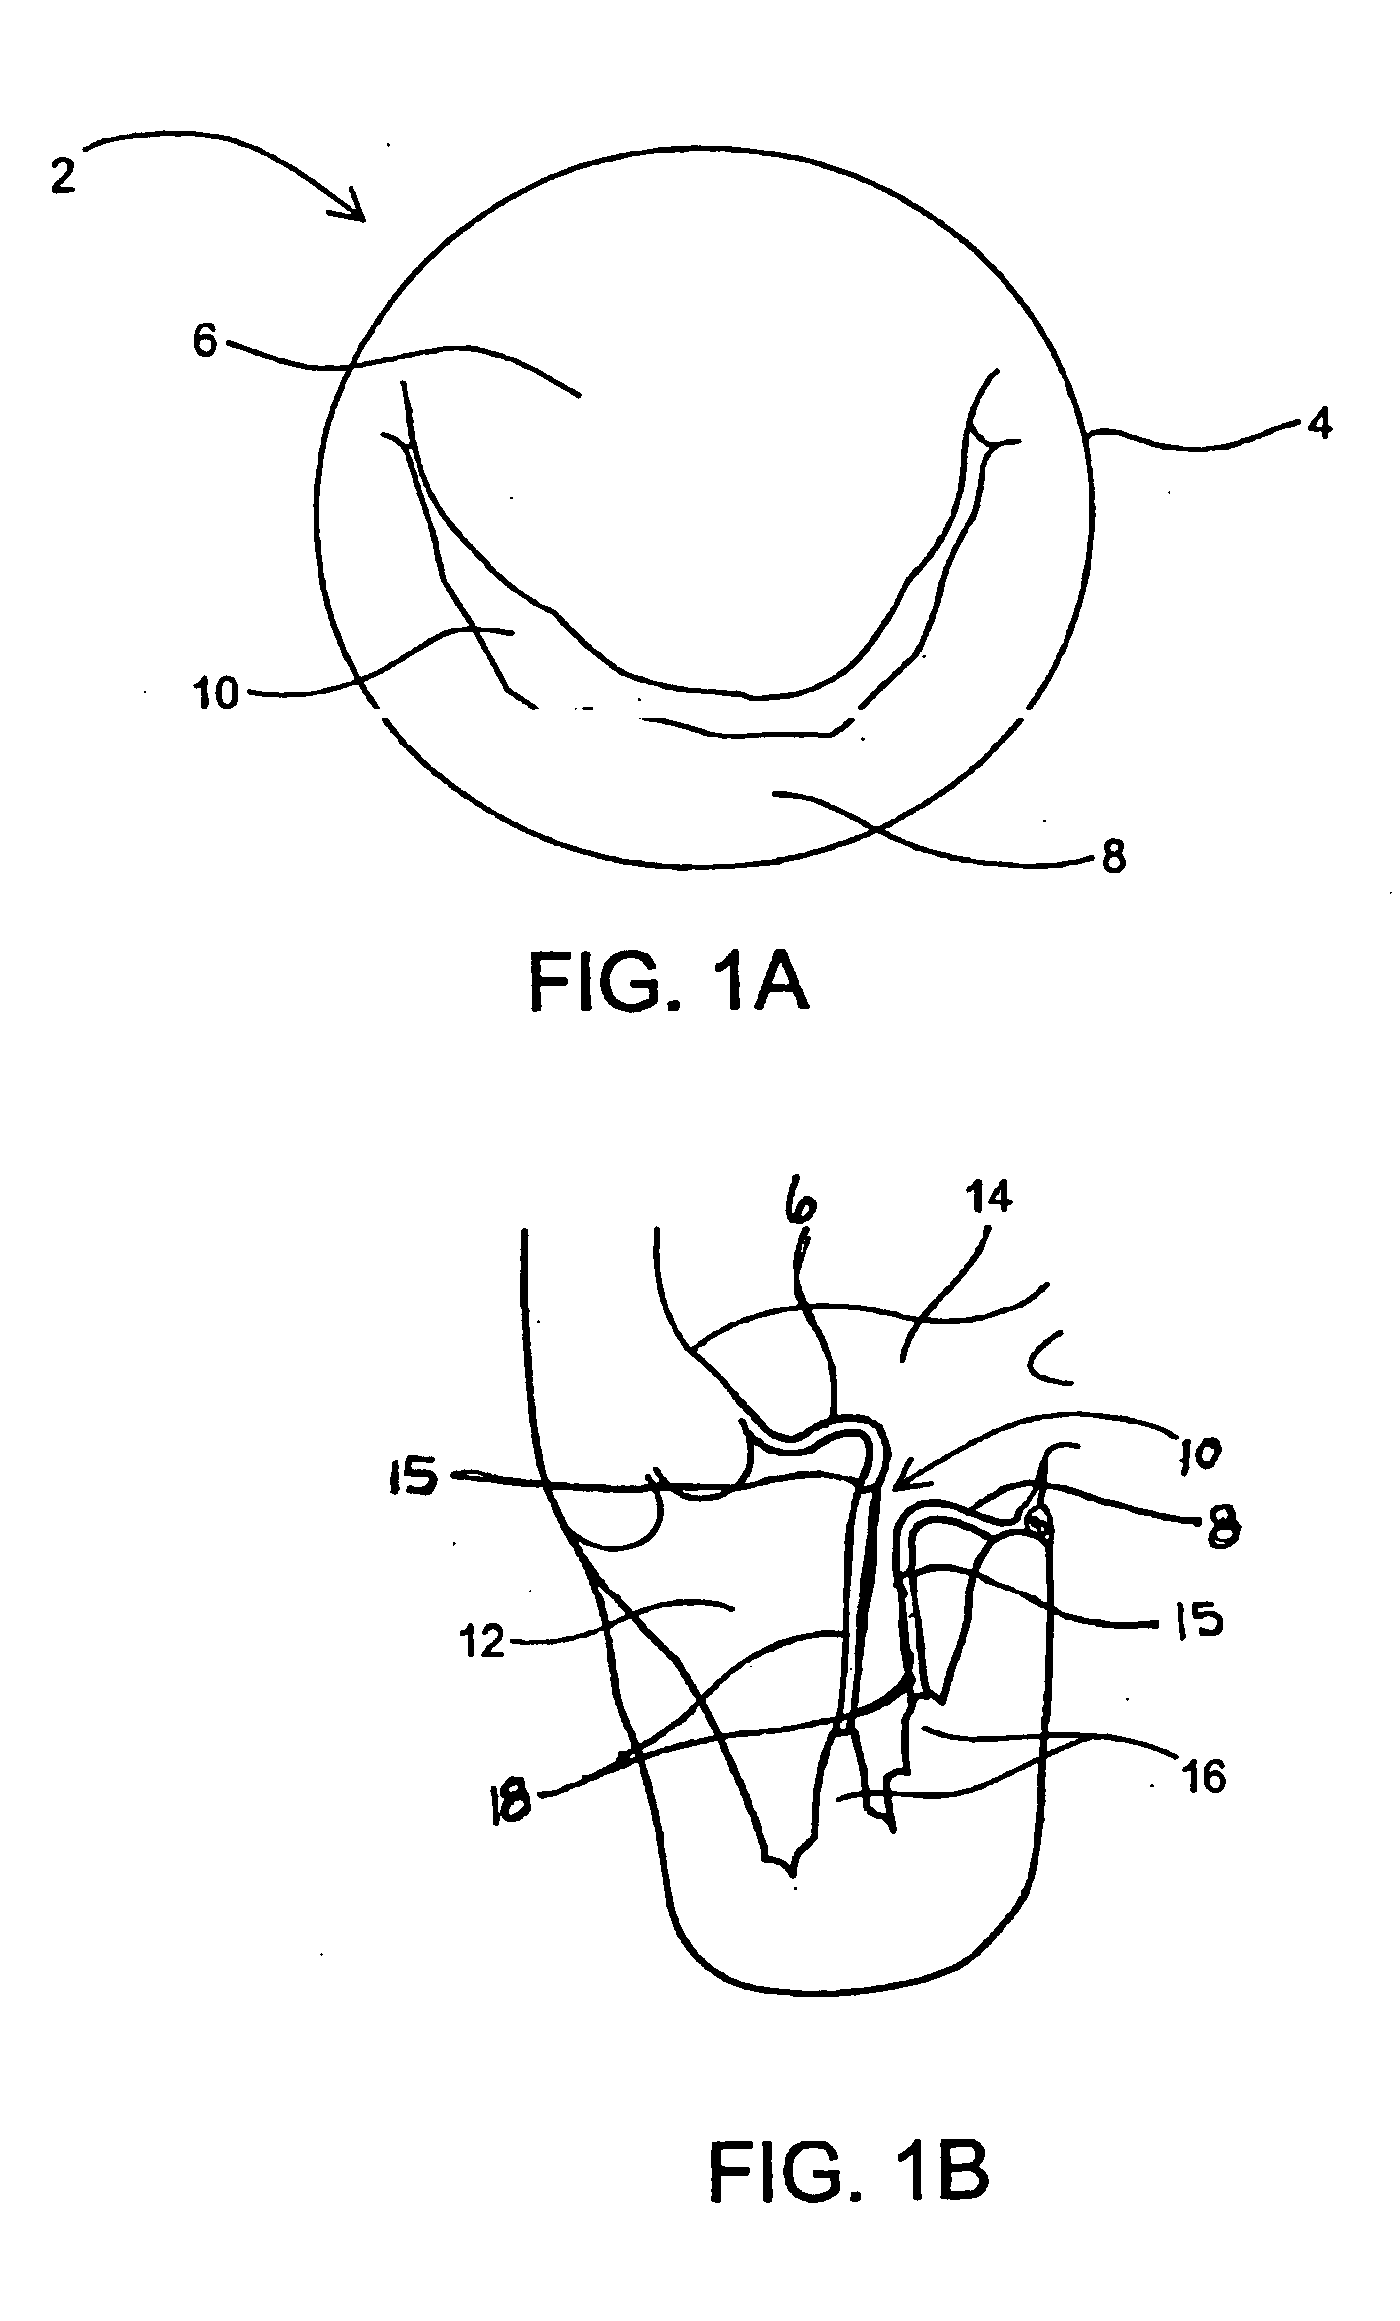 Devices and methods of repairing cardiac valves